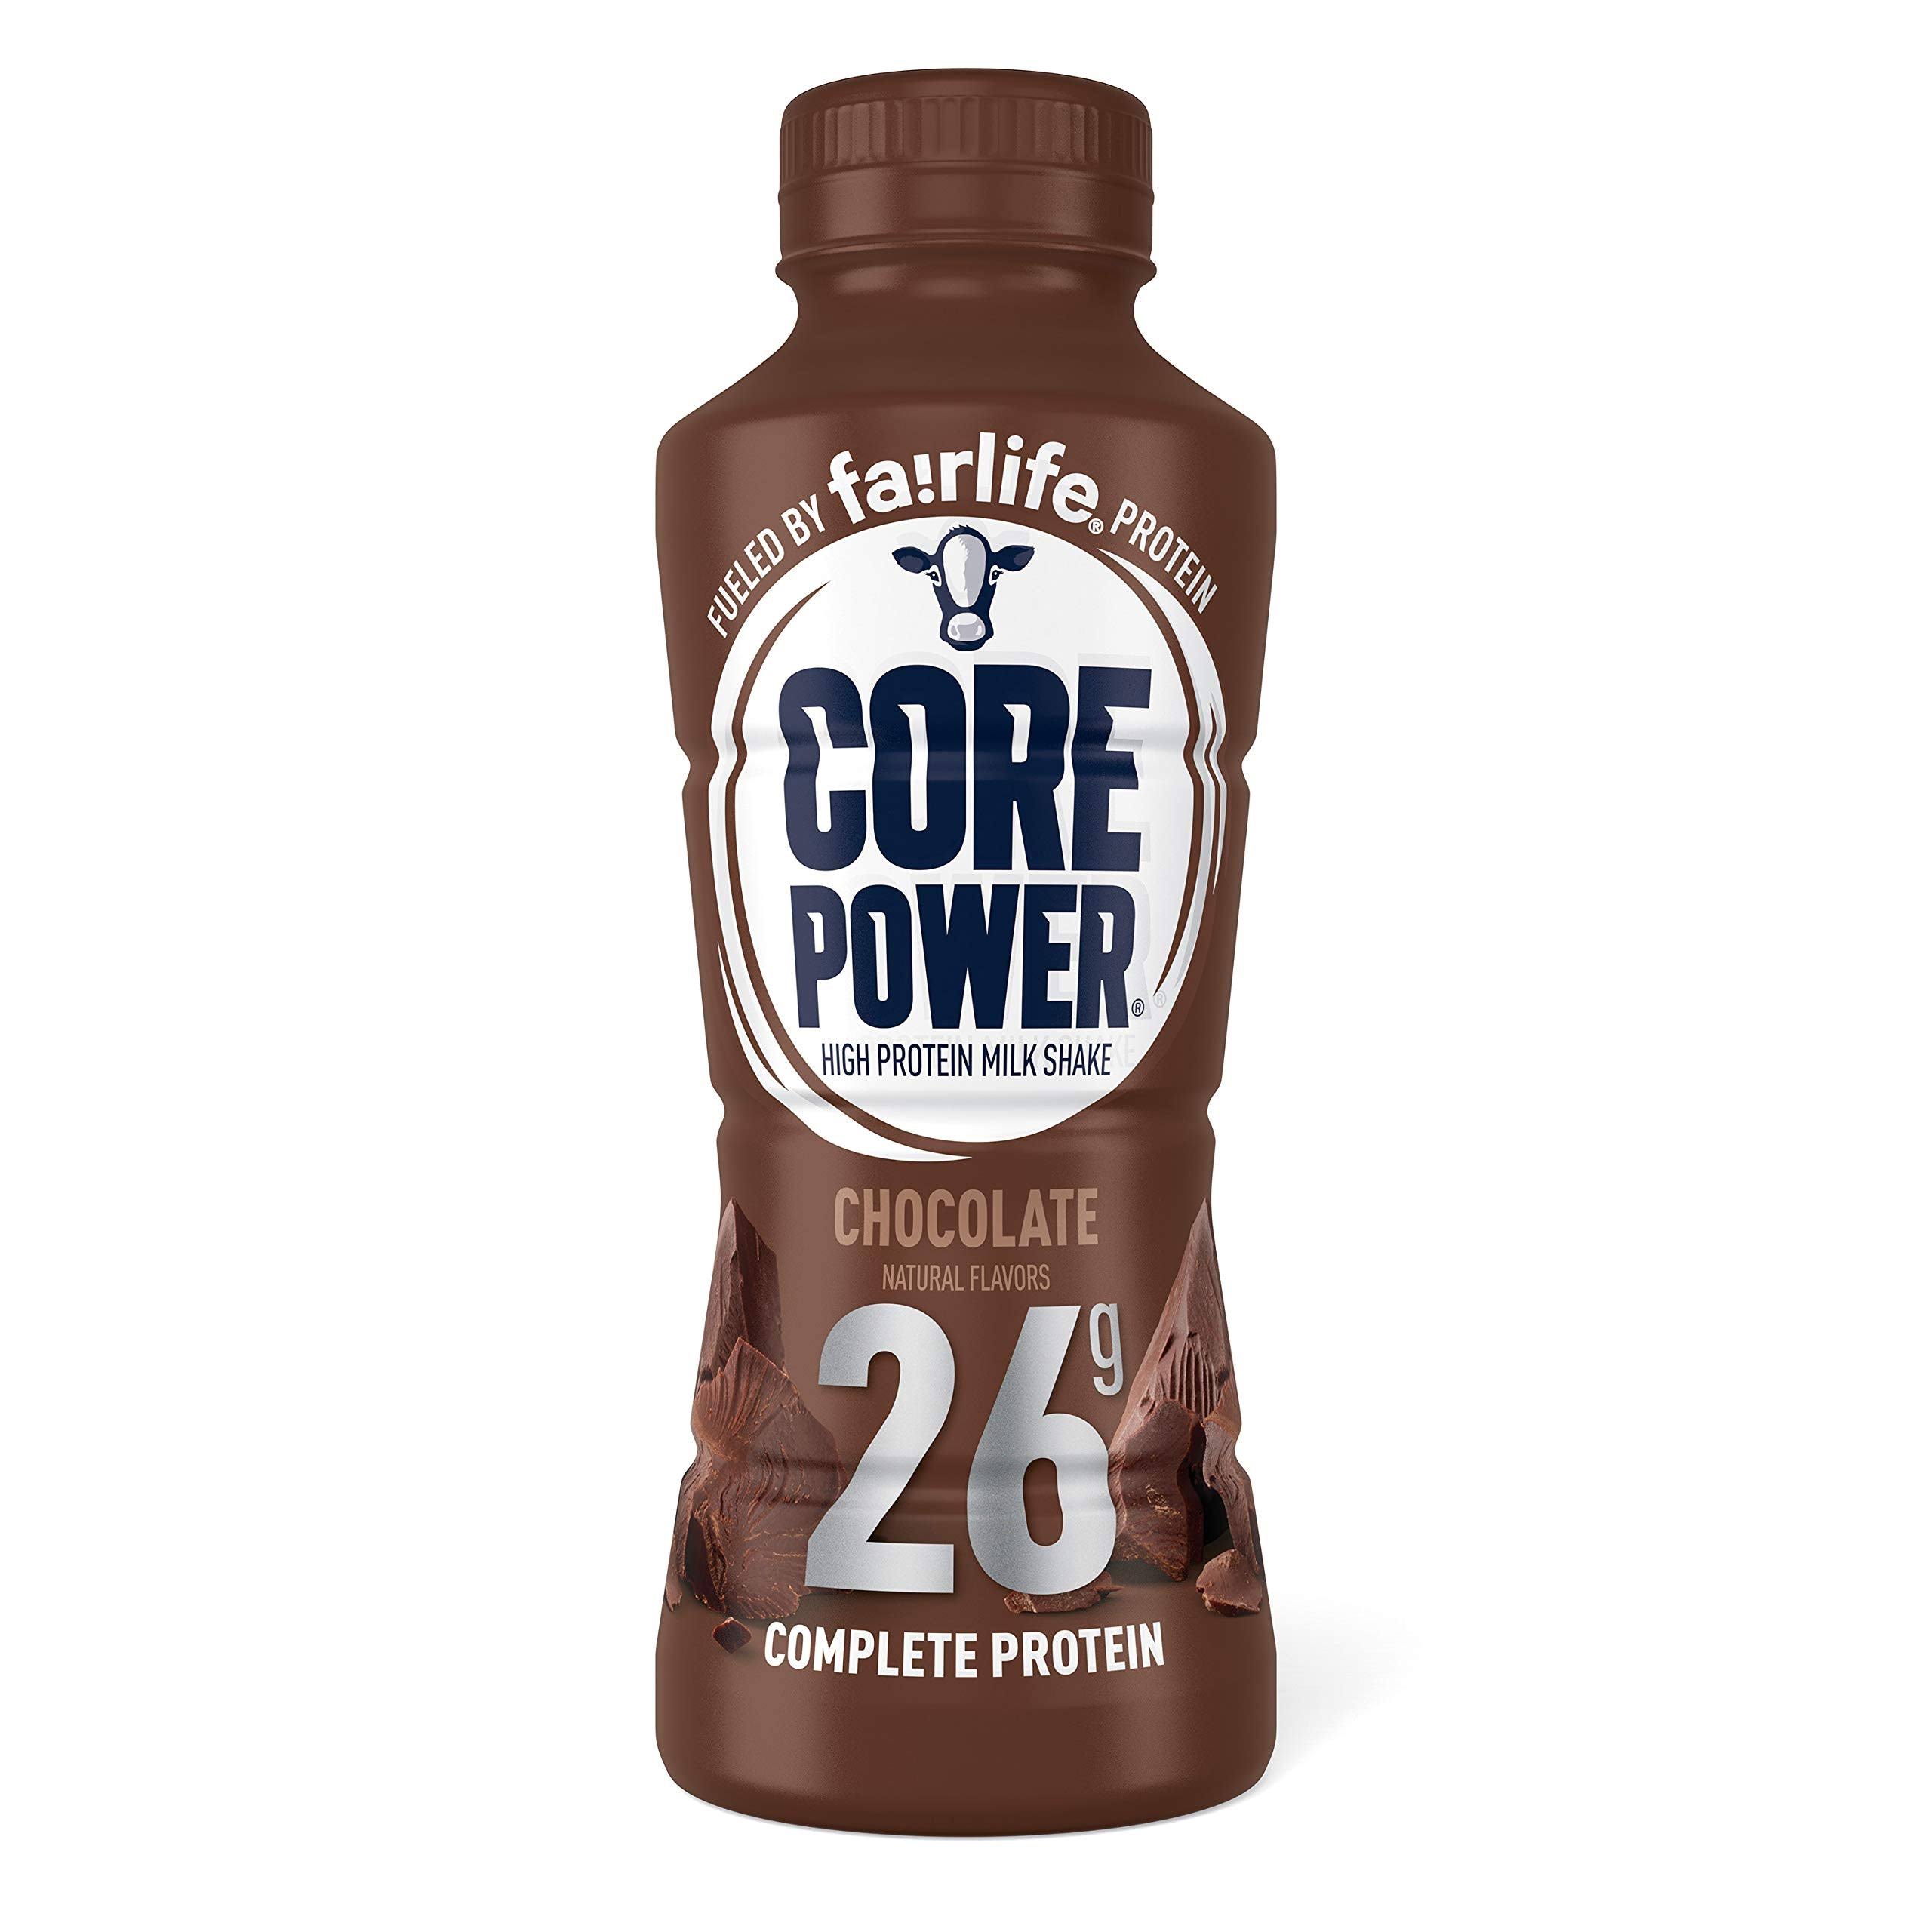 Fairlife Core Power 26g Protein Milk Shakes, Ready To Drink For Workout Recovery, Chocolate, 14 Fl Oz